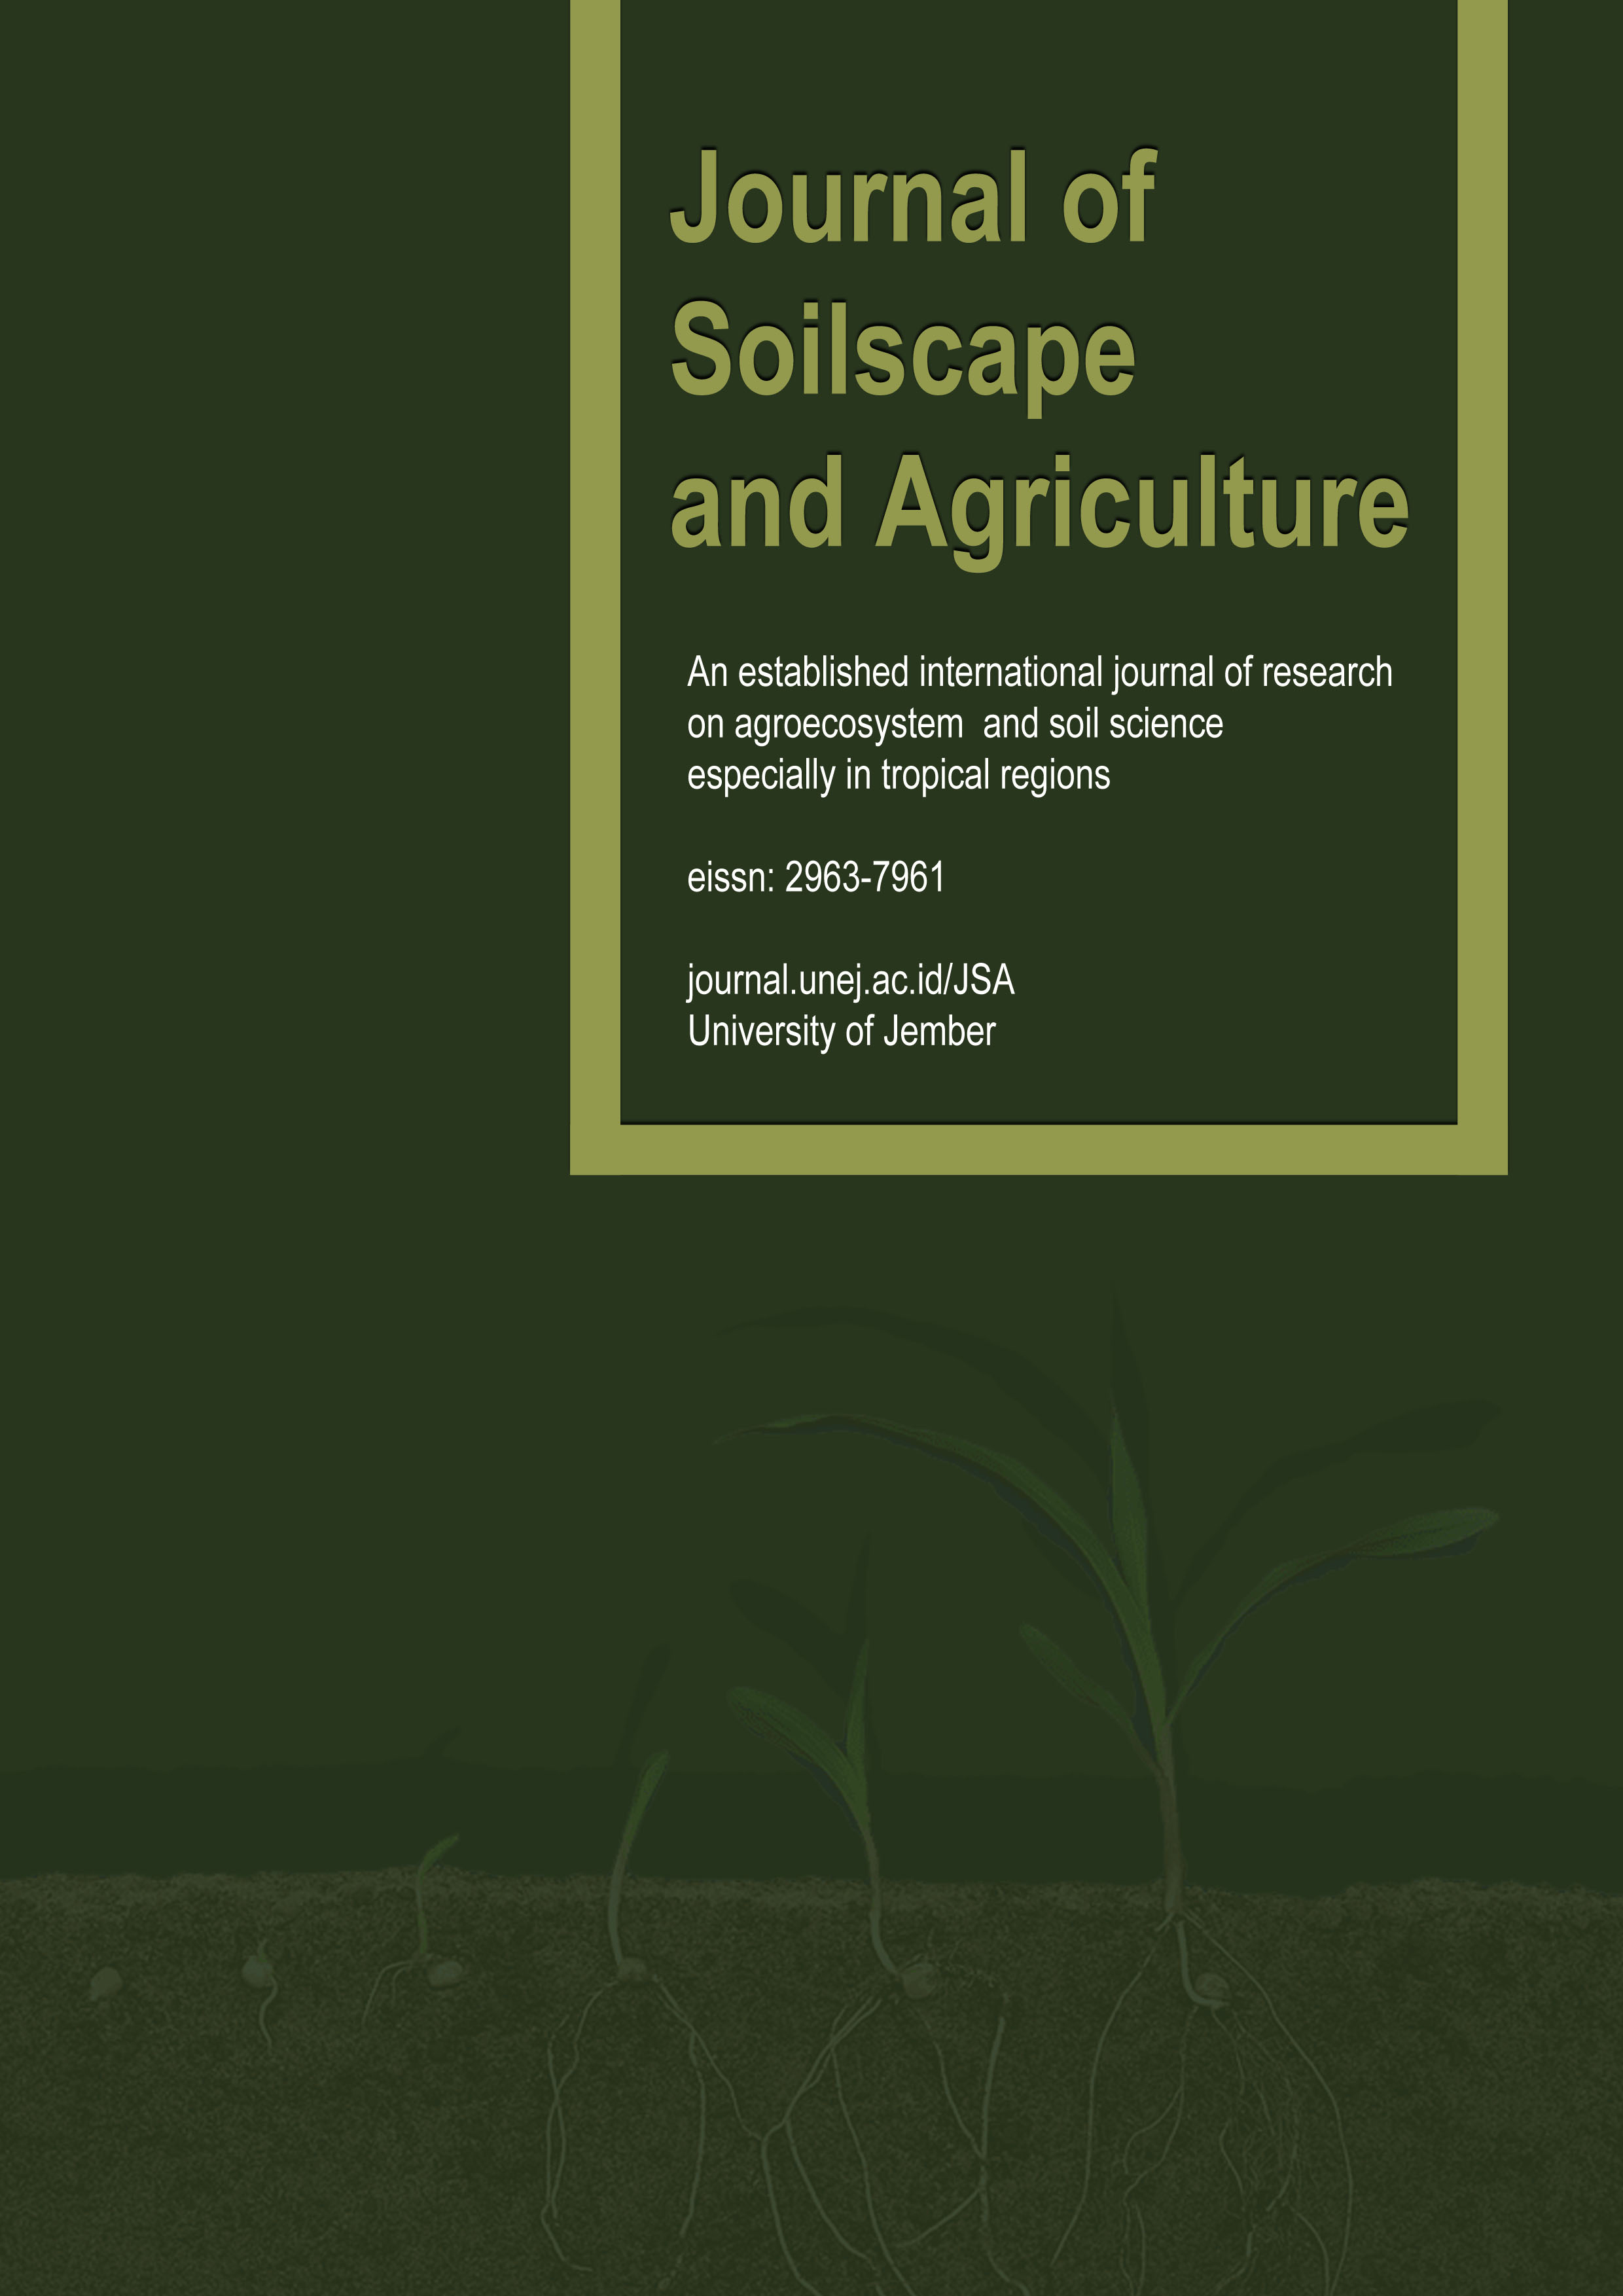 Journal of Soilscape and Agriculture (JSA); e-ISSN:2963-7961 is a scientific journal managed and published by the Department of Soil Sciences, Faculty of Agriculture, Jember University. Journal of Soilscape and Agriculture (JSA) is a scientific periodic publication that presents scientific research from all area of soil science and agriculture such as soil fertility, soil and water conservation, plant nutrition, soil biotechnology, plant and environmental science.